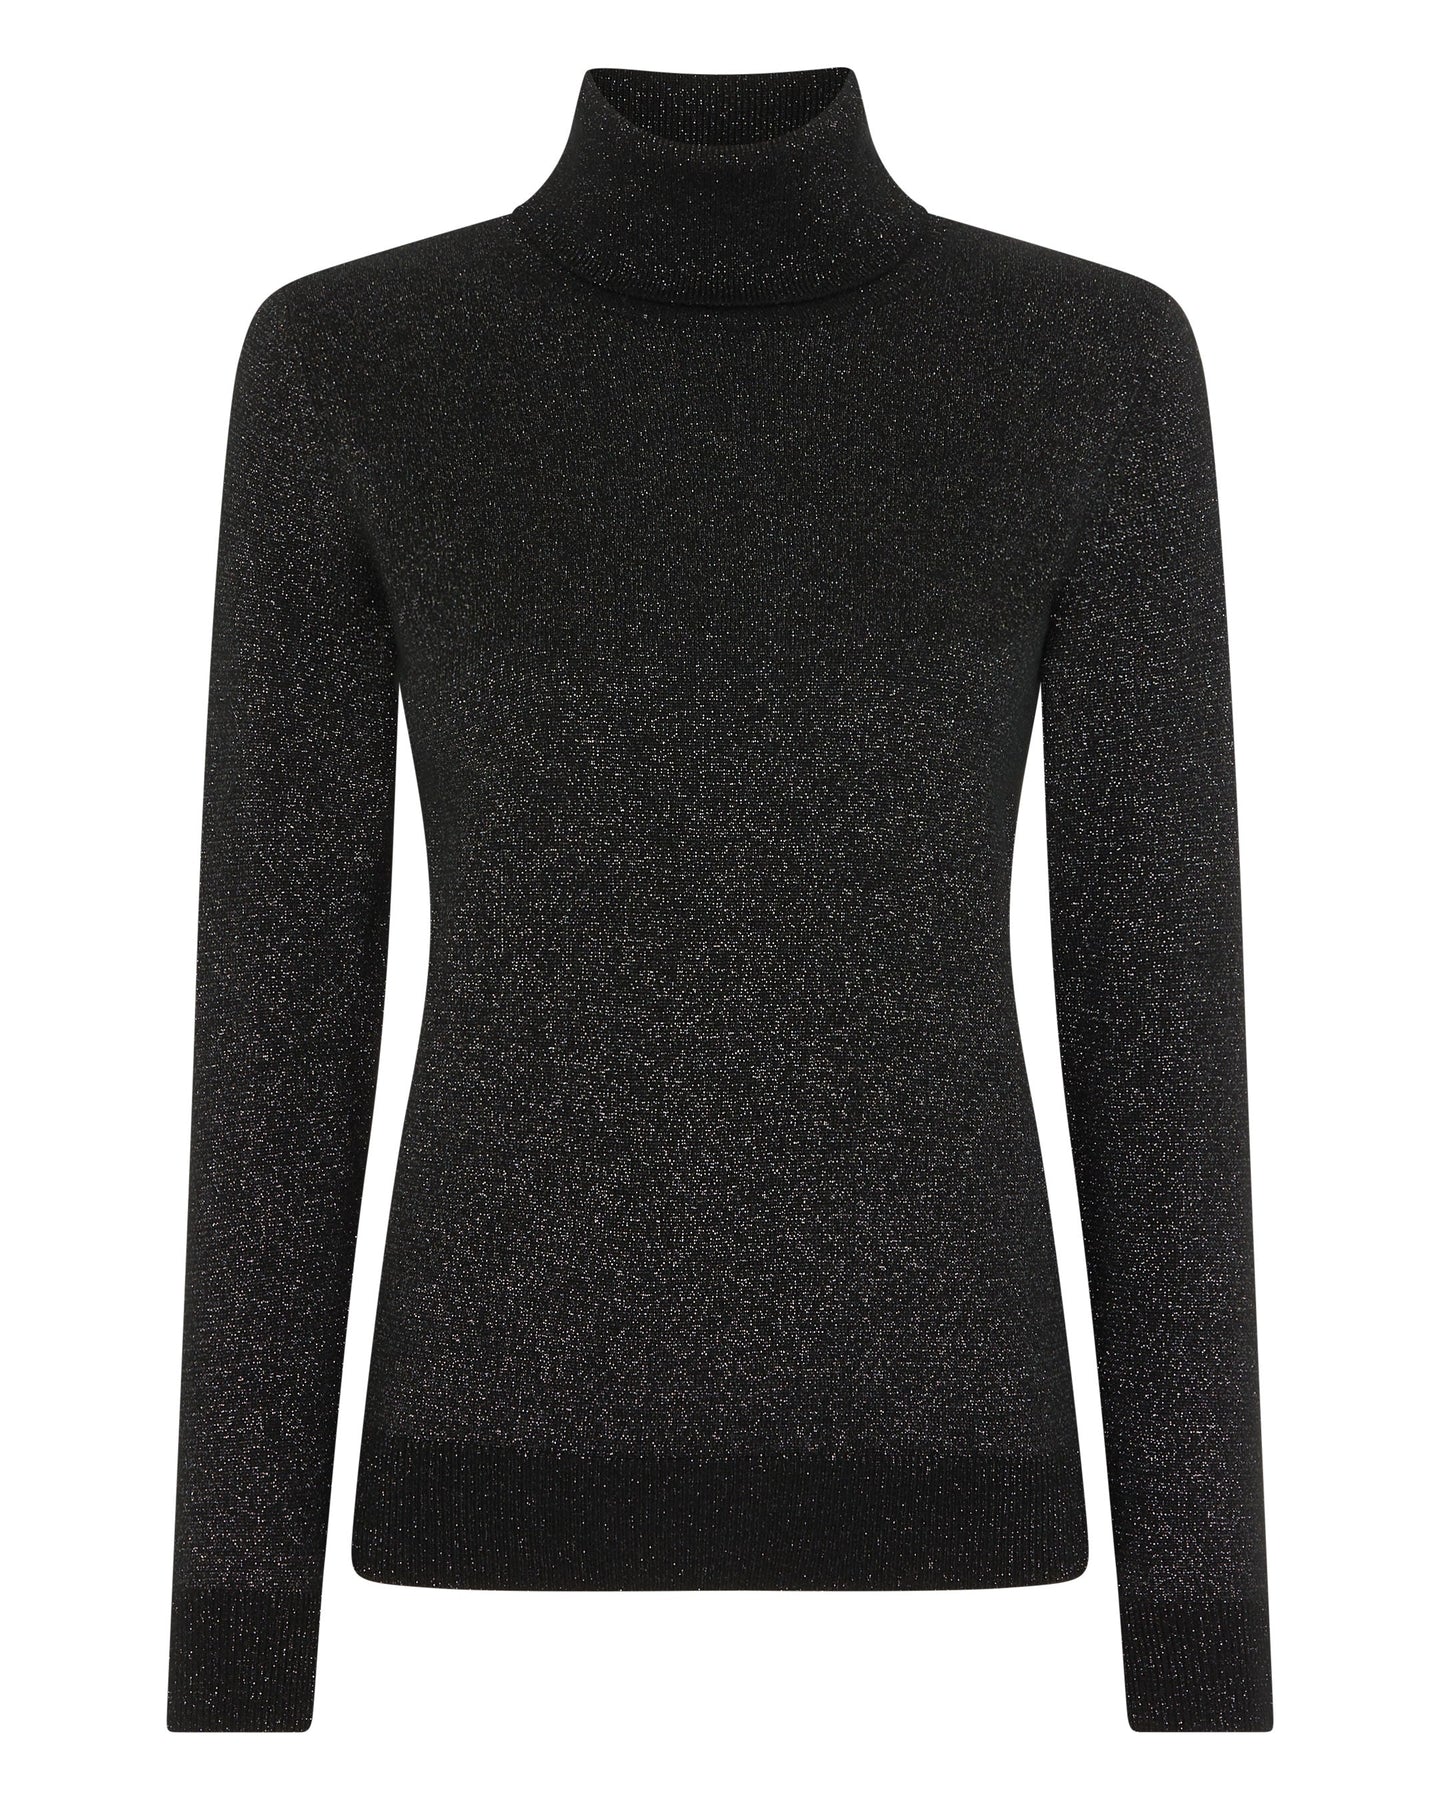 N.Peal Women's Polo Neck Cashmere Jumper With Lurex Black Sparkle